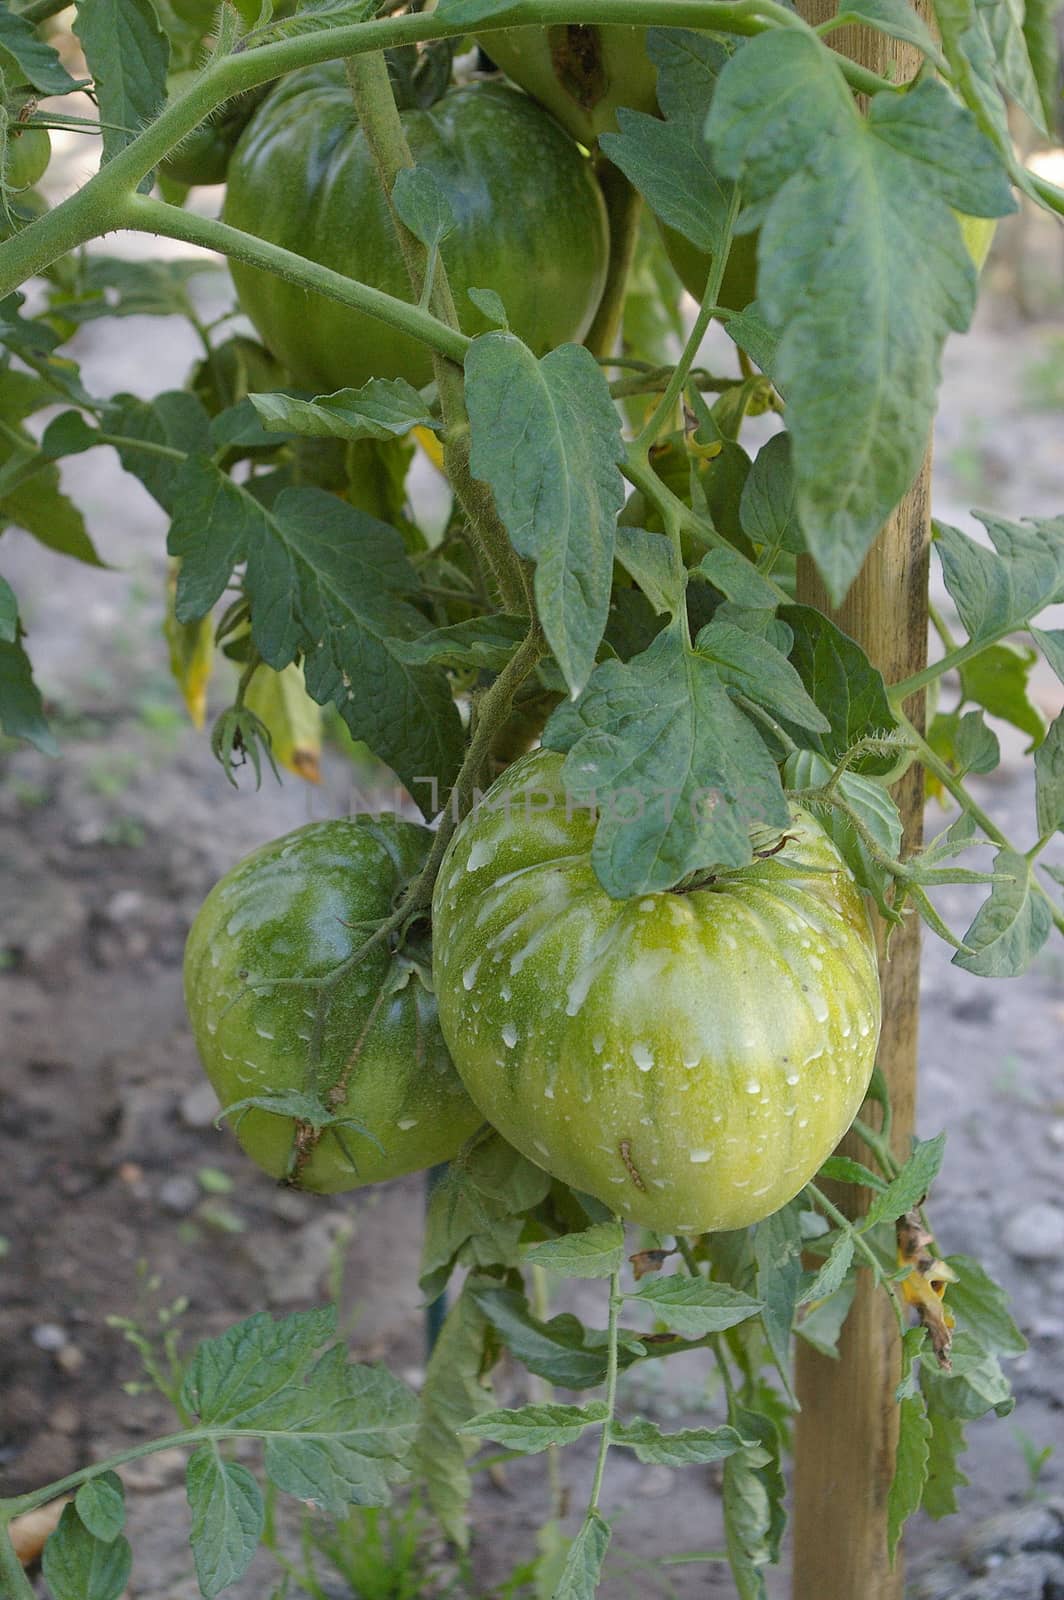 Unripe green tomatoes growing on the vine